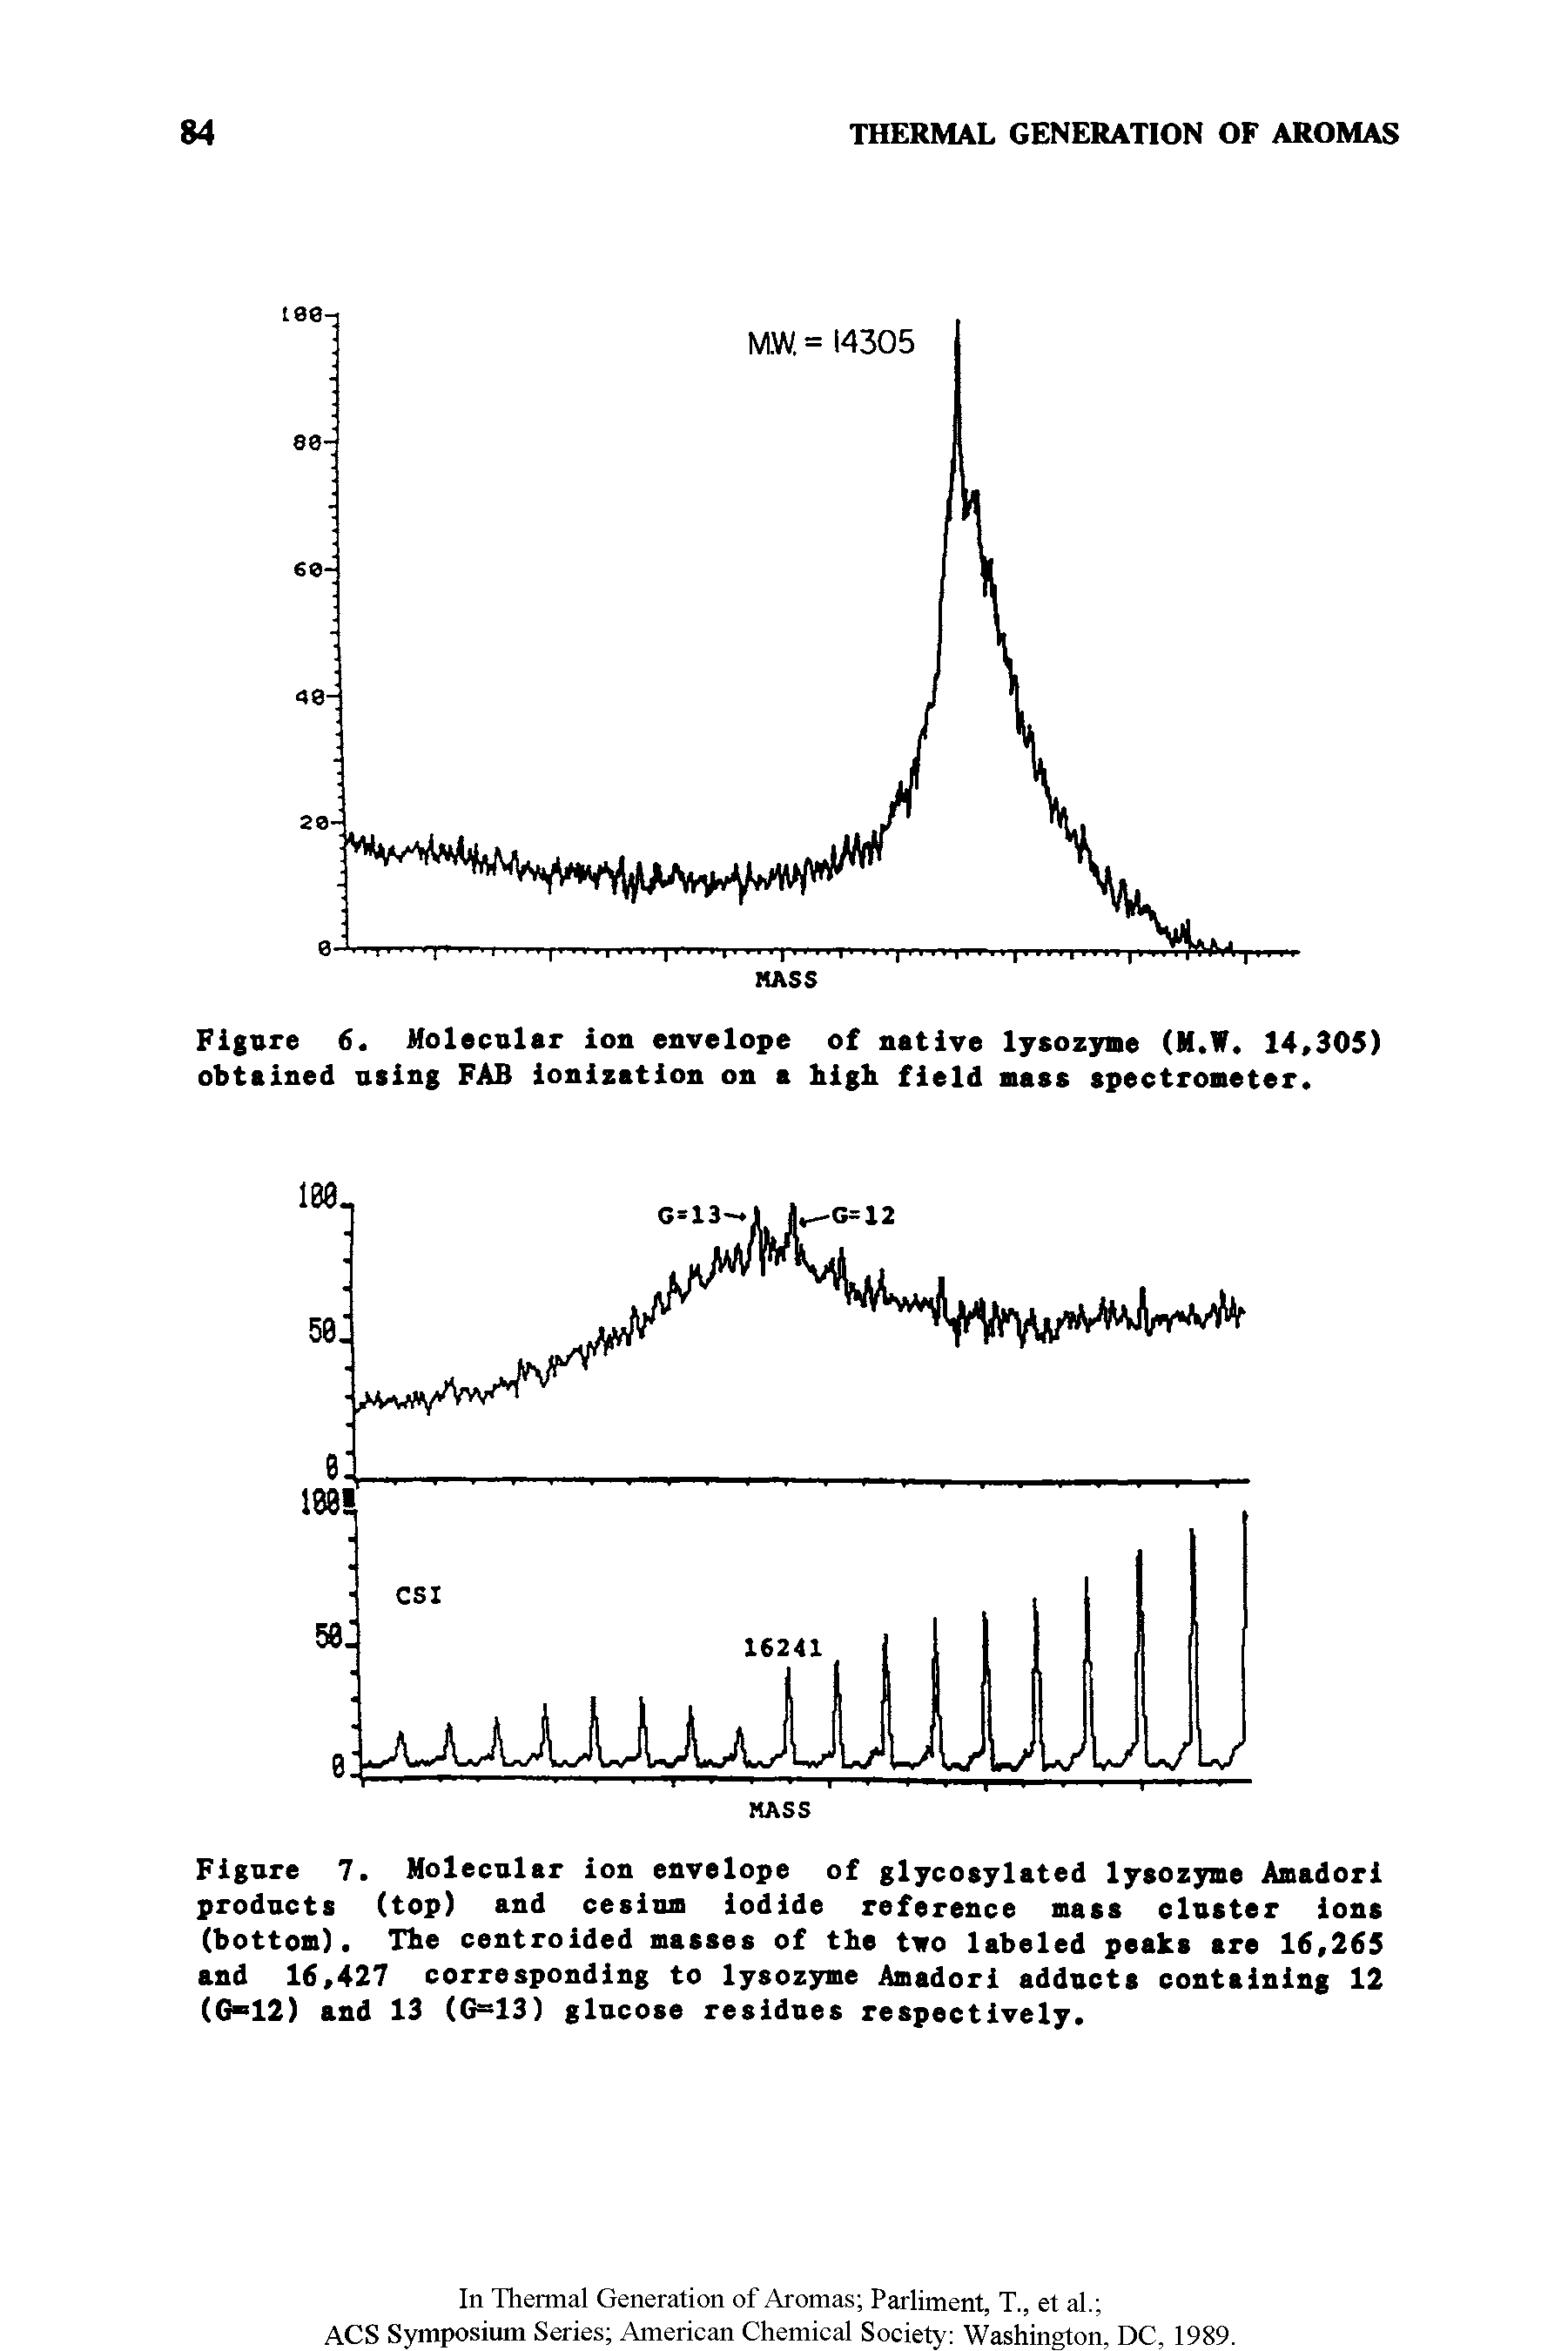 Figure 7. Molecular ion envelope of glycosylated lysozyme Amadori products (top) and cesium iodide reference mass cluster ions (bottom). The centroided masses of the tiro labeled peaks are 16,265 and 16,427 corresponding to lysozyme Amadori adducts containing 12 (G 12) and 13 (G=13) glucose residues respectively.